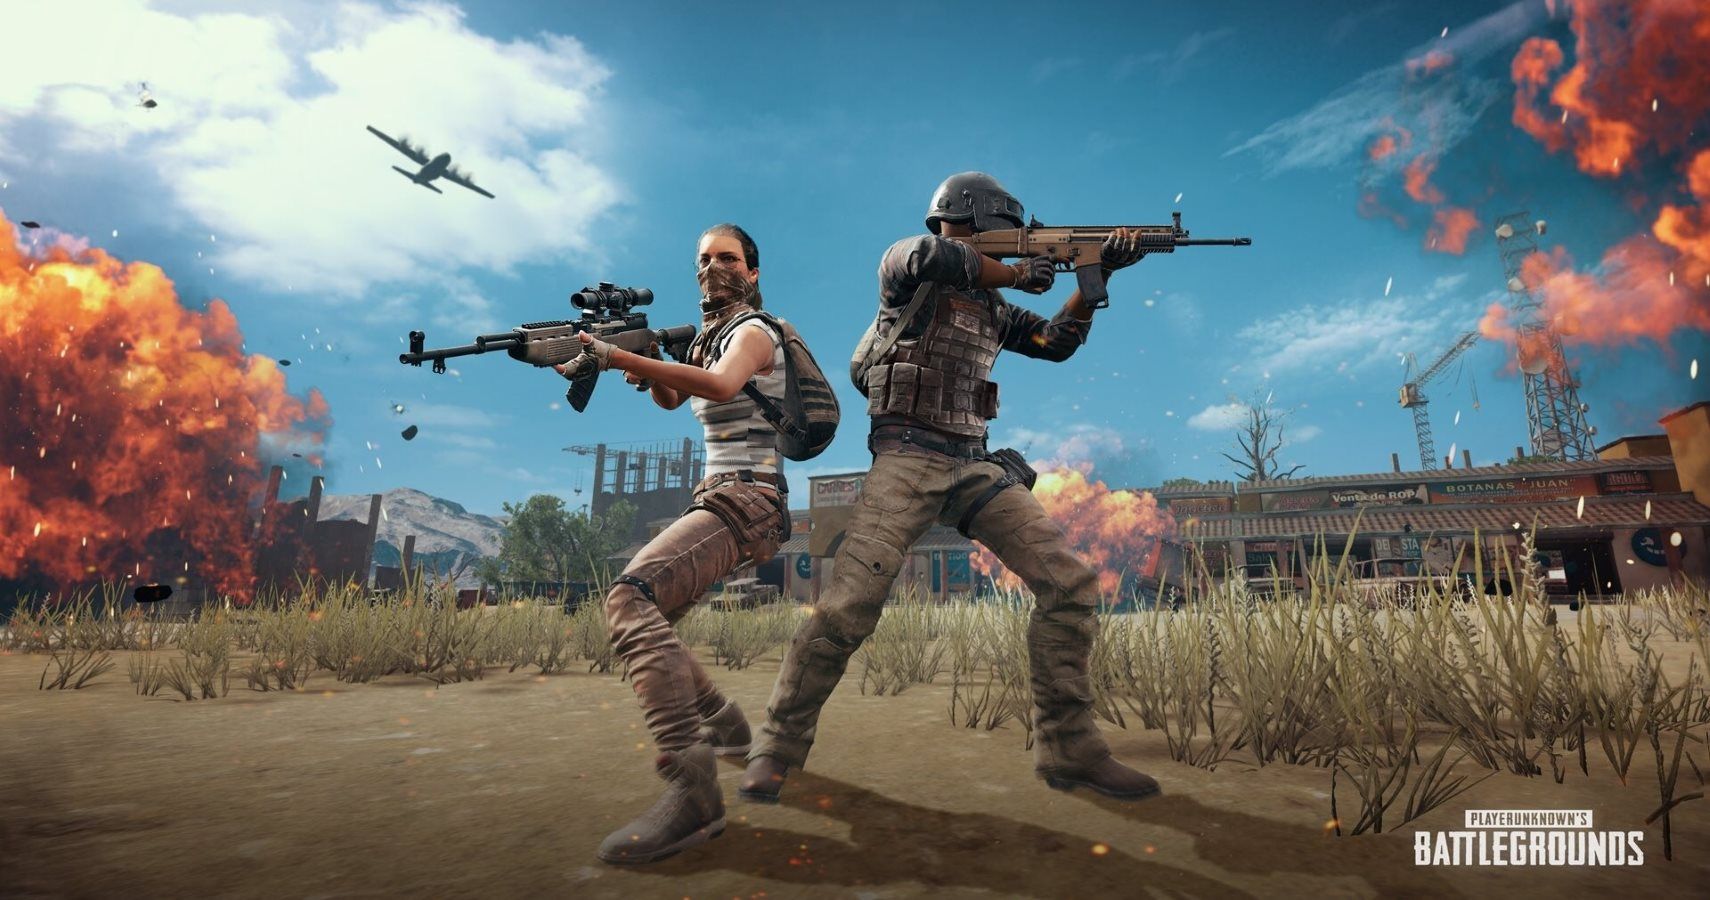 Since January, 141 Chinese Hackers Have Been Arrested For Creating PUBG Cheats